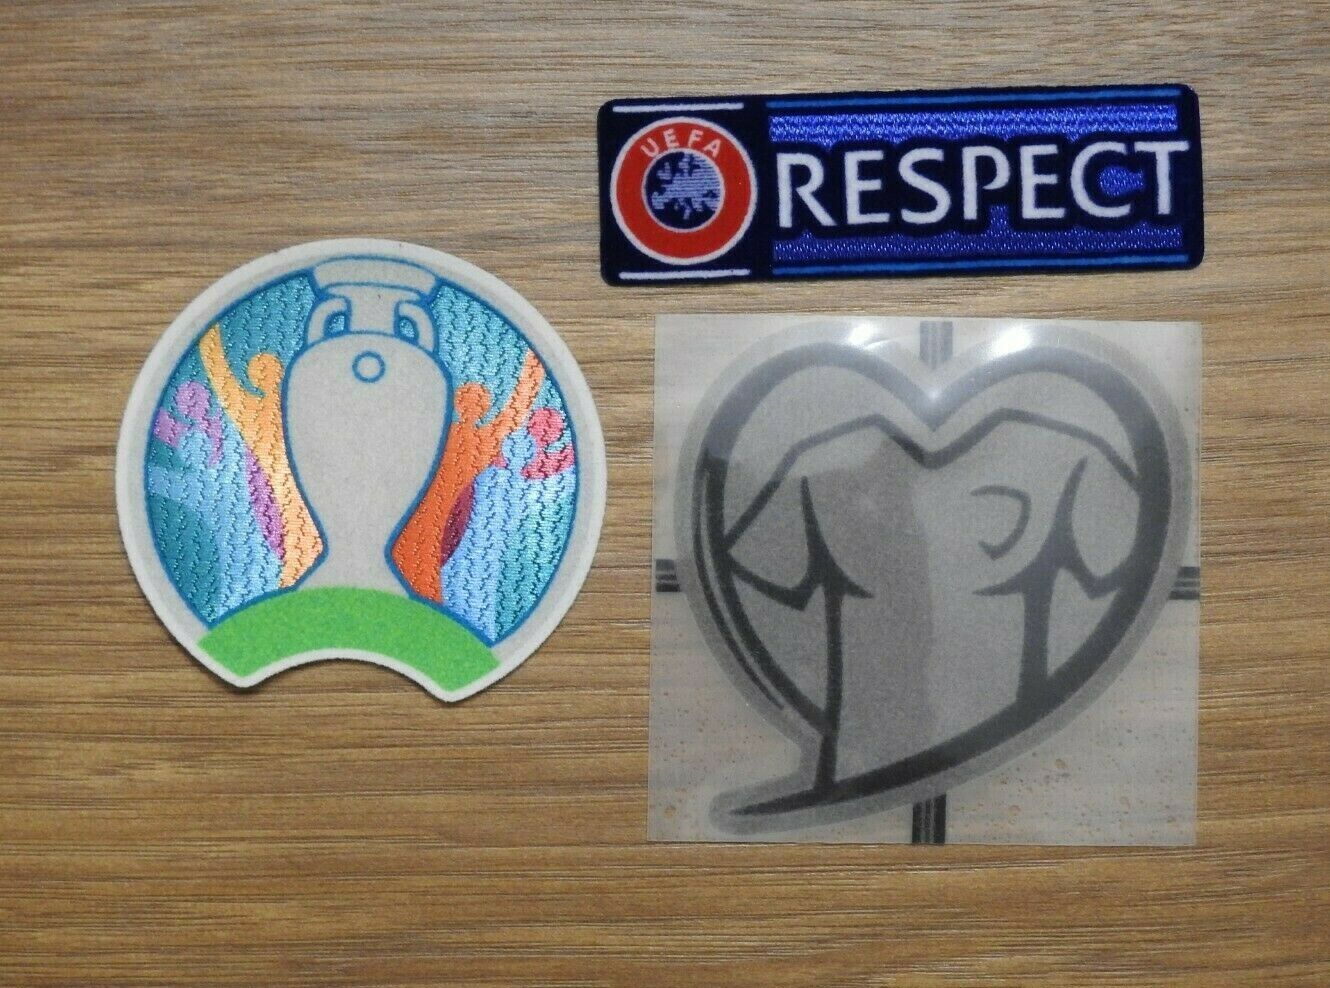 Euro 2020 Football Shirt Patch Qualifiers Qualifying Soccer Badge Set Real Pics